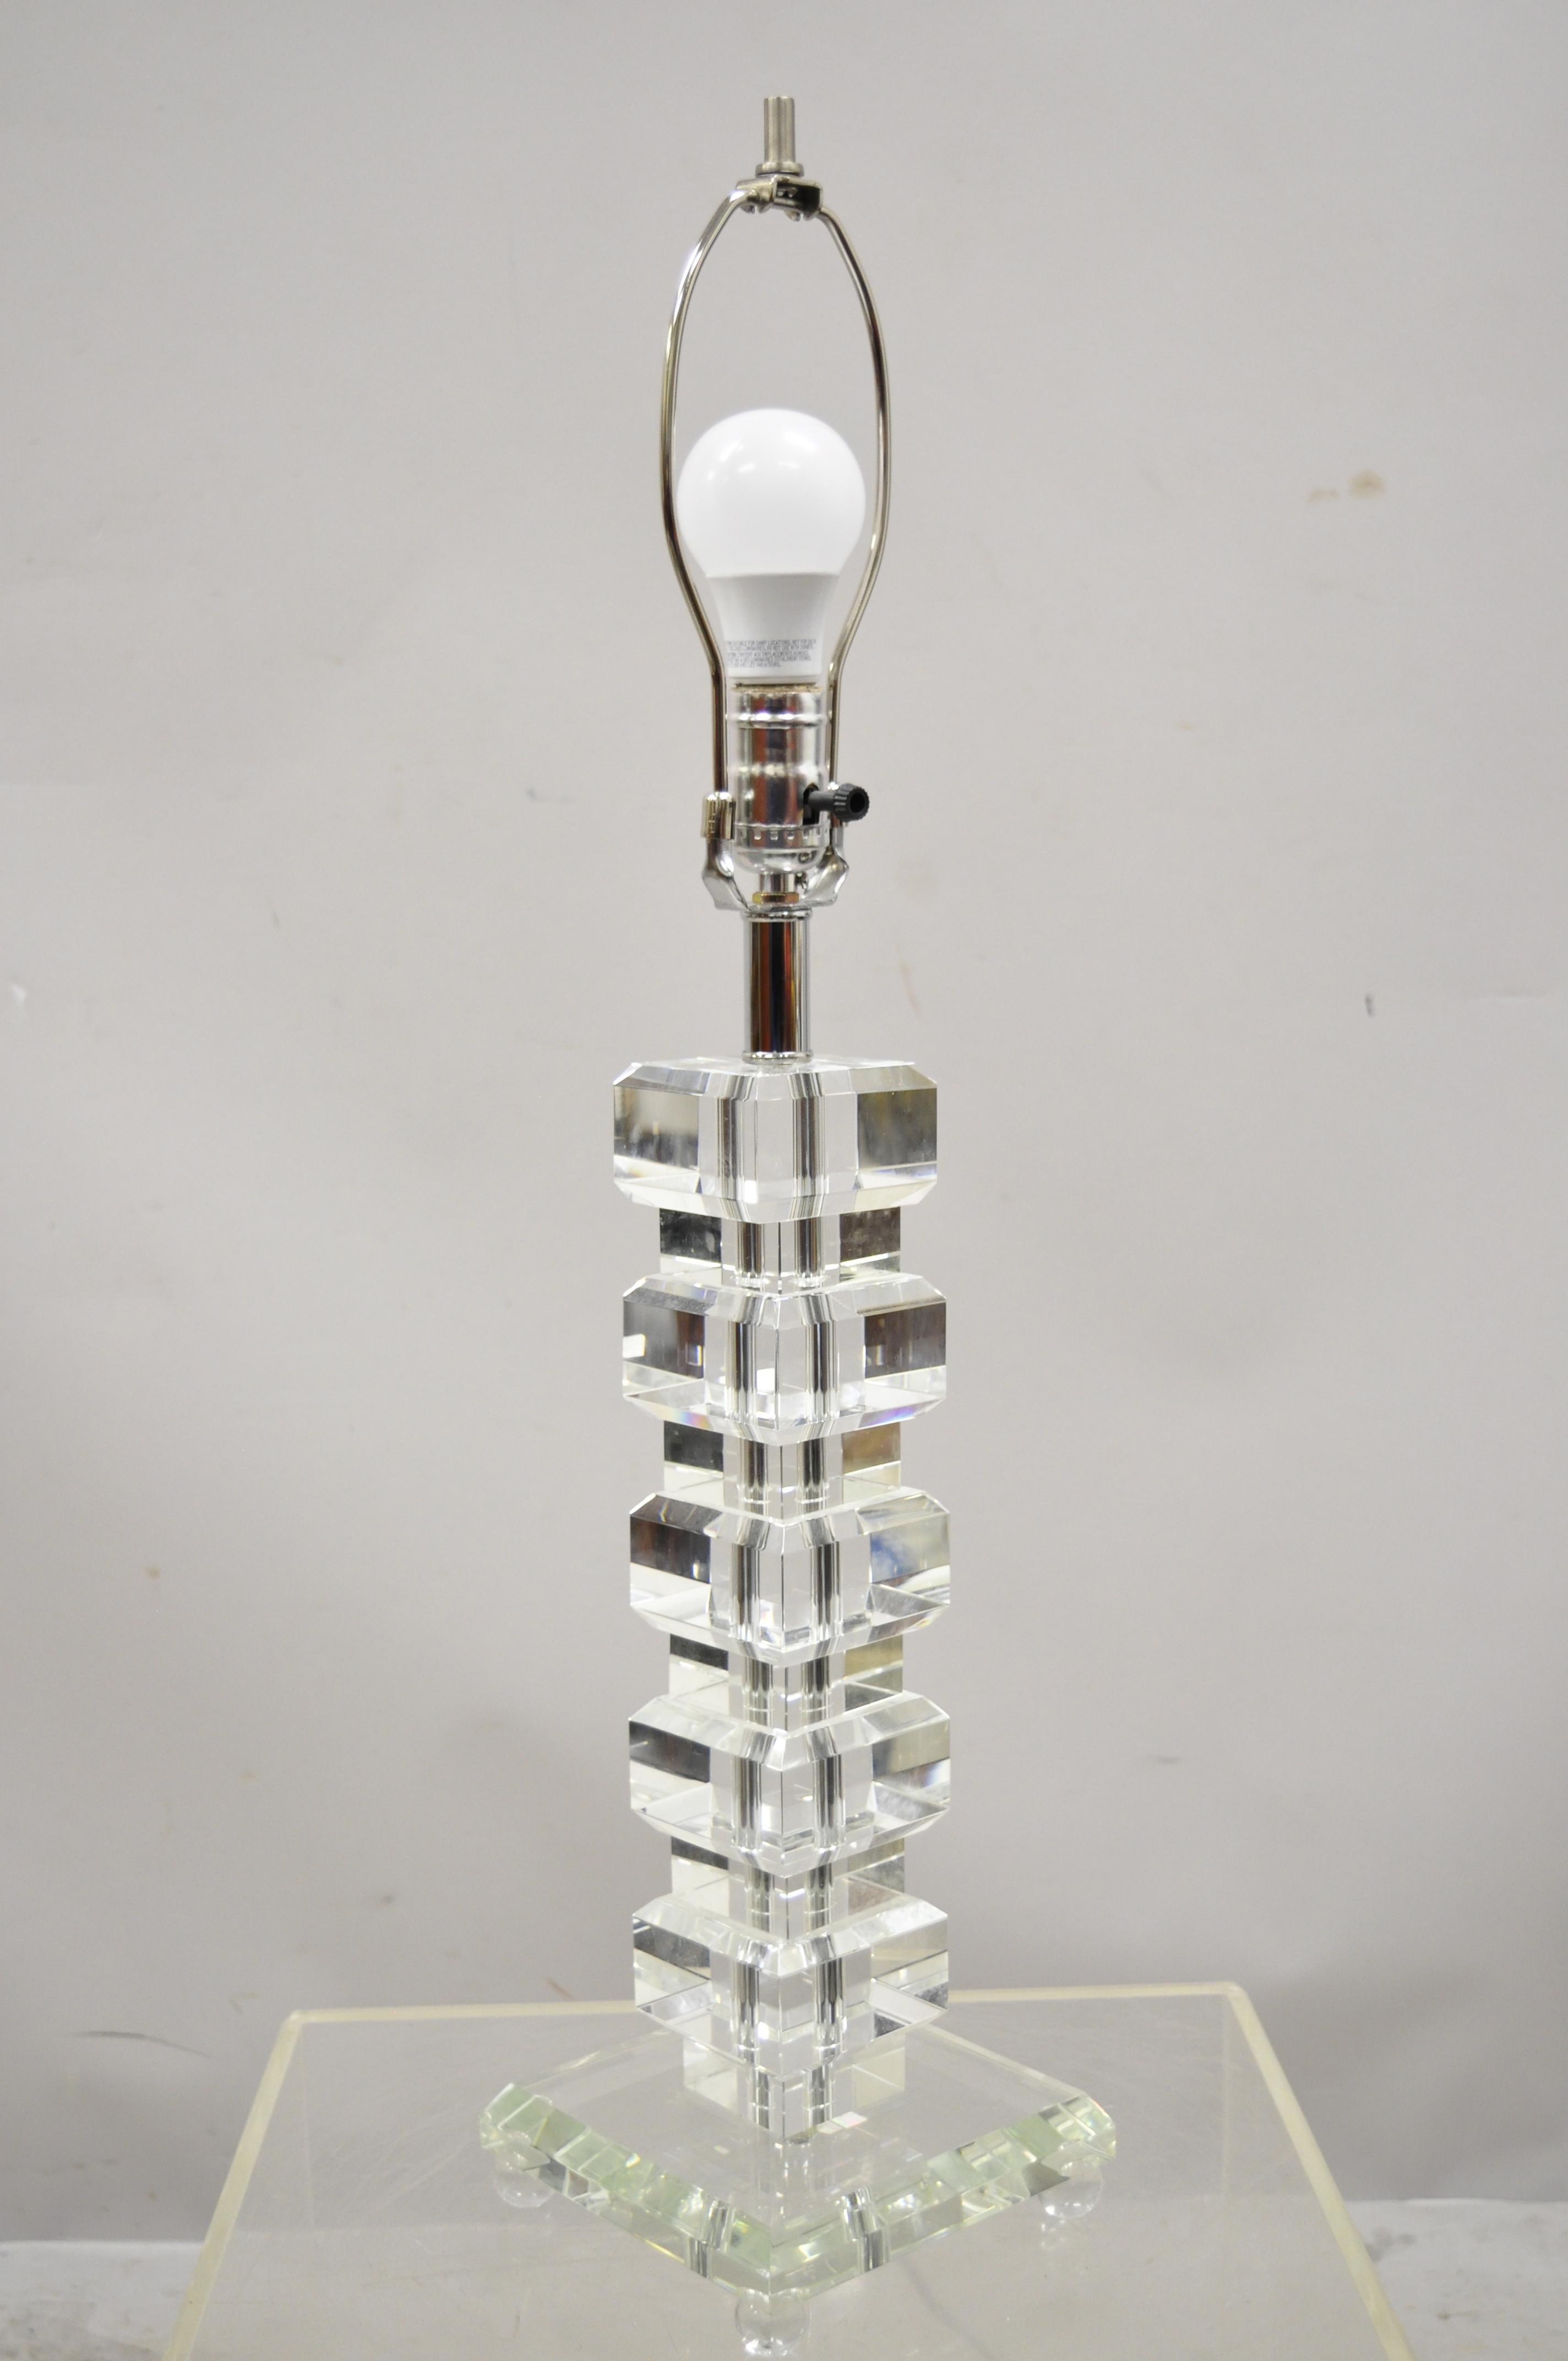 Contemporary Mid-Century Modern style stacked Lucite acrylic ice cube column table lamp with shade. Item features chrome hardware, 1 light socket, clear Lucite cubes, great style and form. Shade included, Circa 21st century, Pre-owned. Measurements: